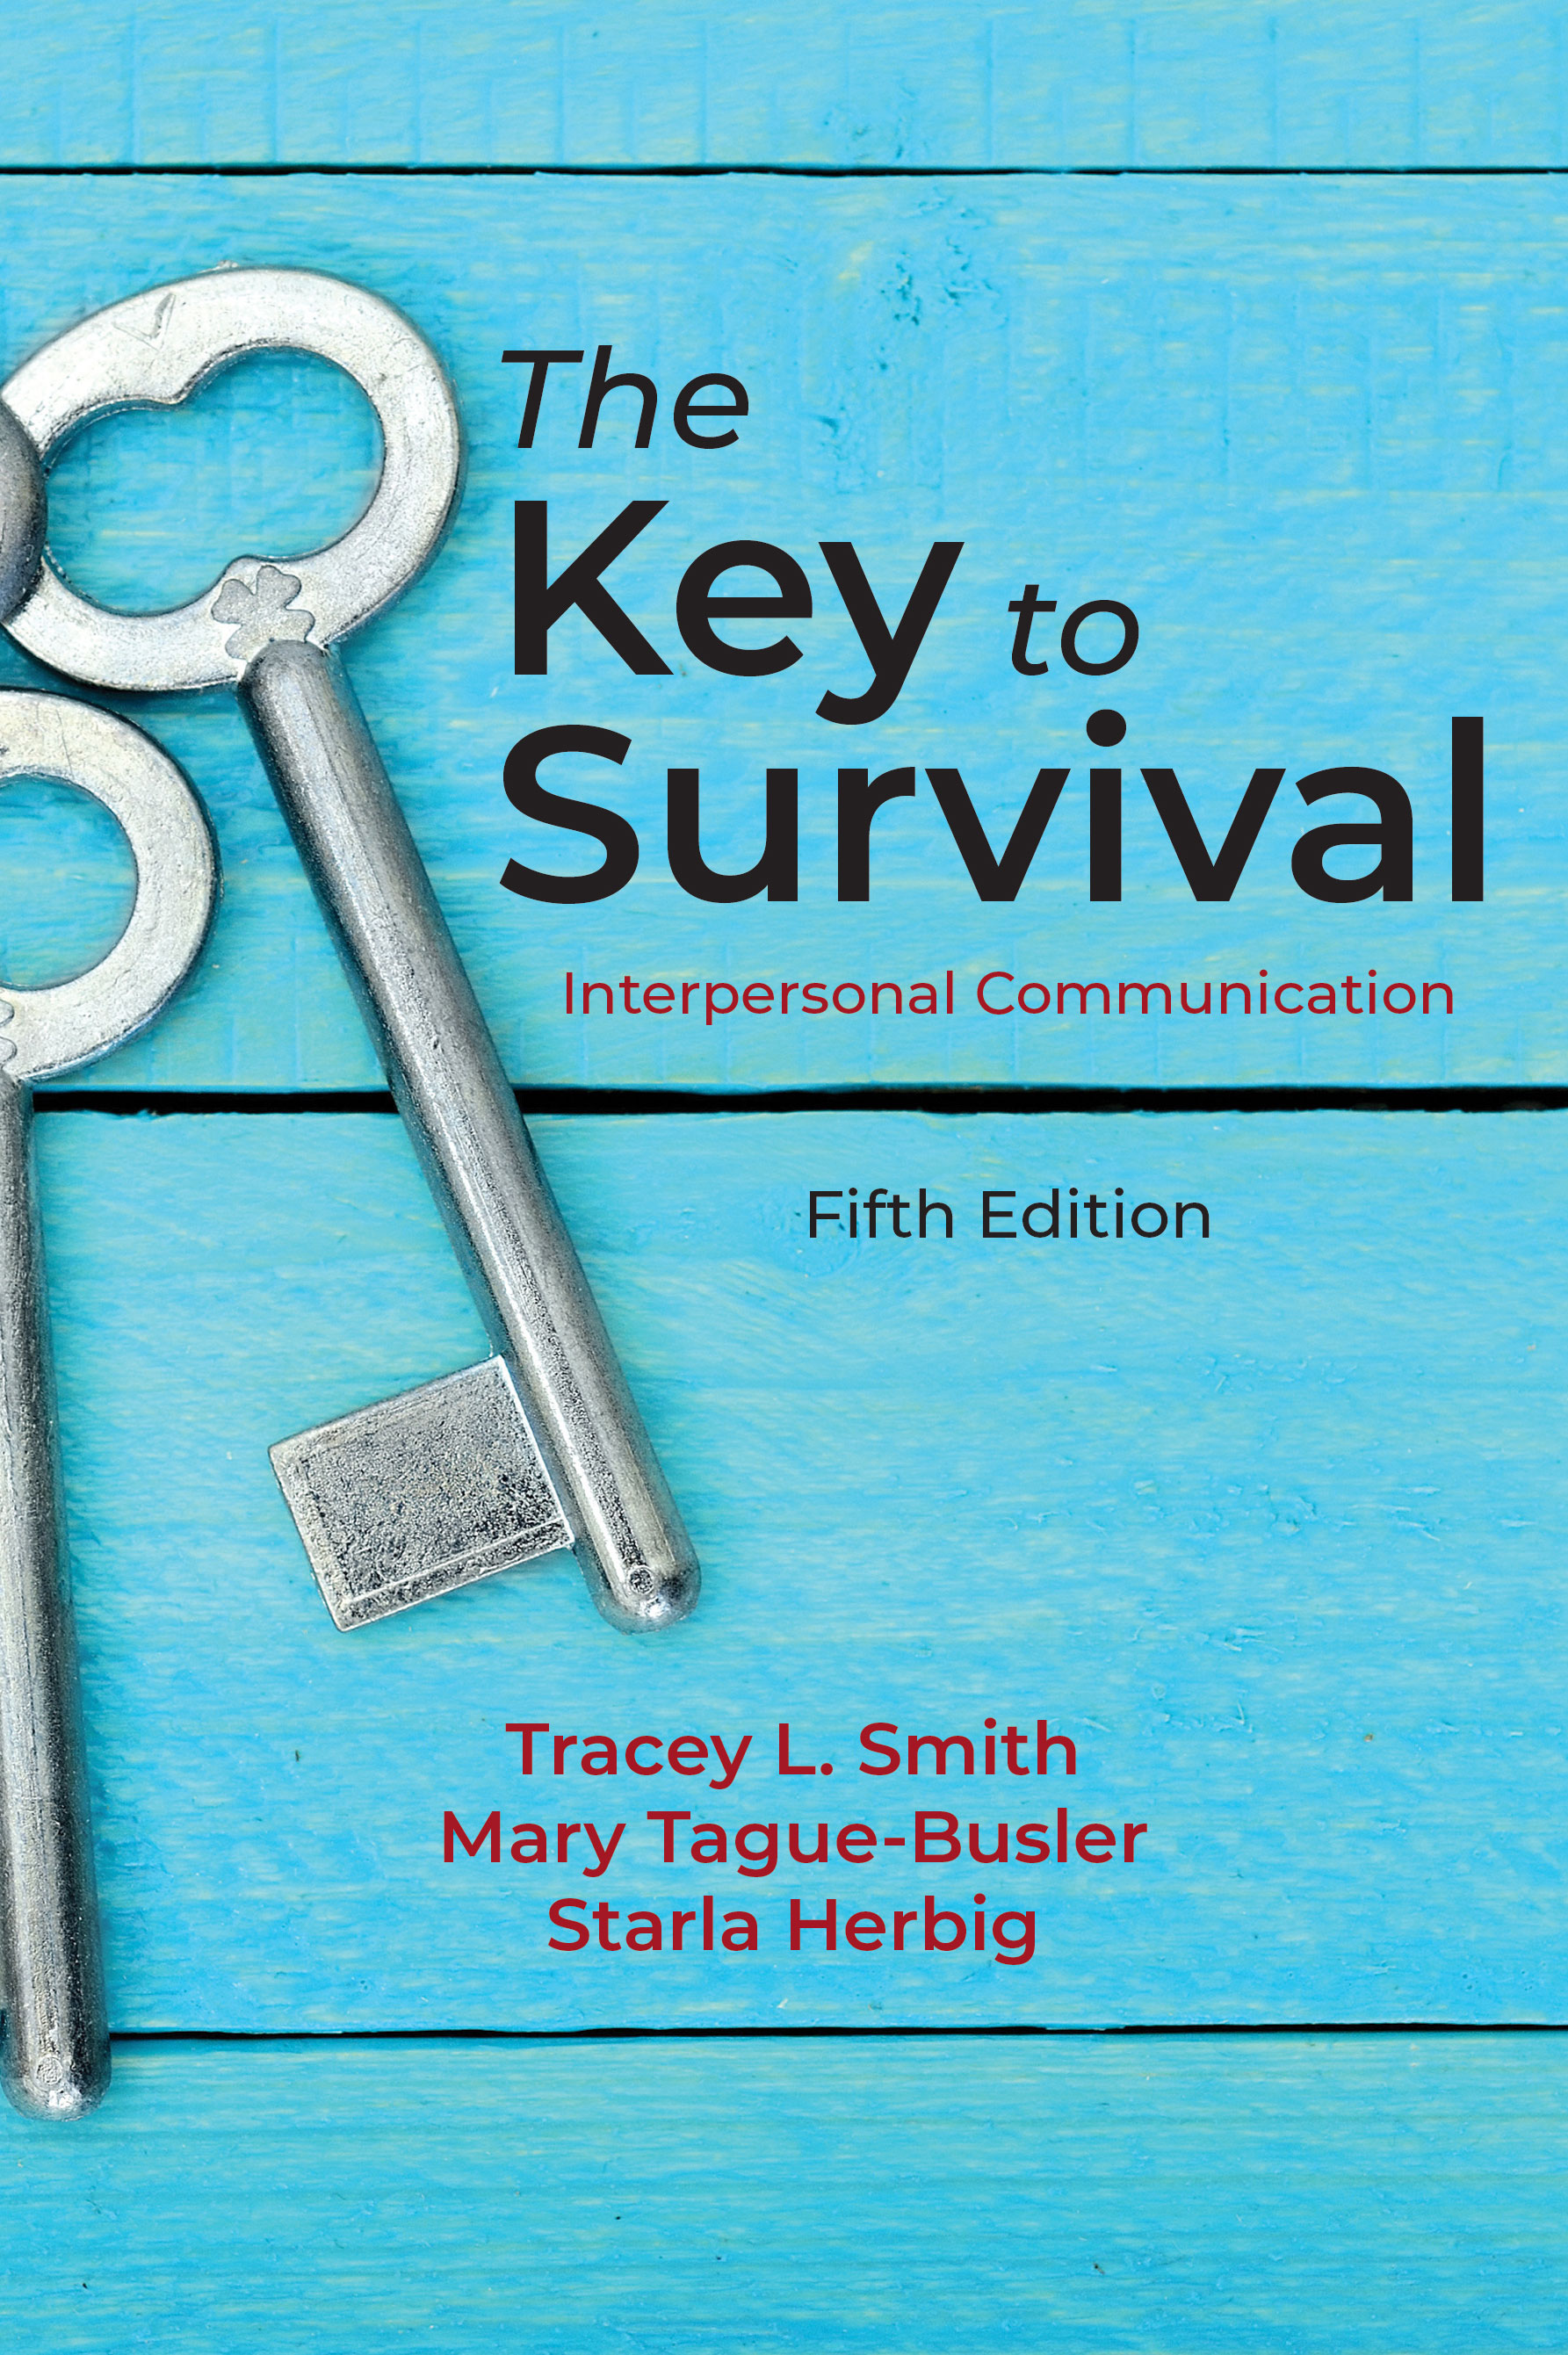 The Key to Survival: Interpersonal Communication by Tracey L. Smith, Mary  Tague-Busler, Starla  Herbig